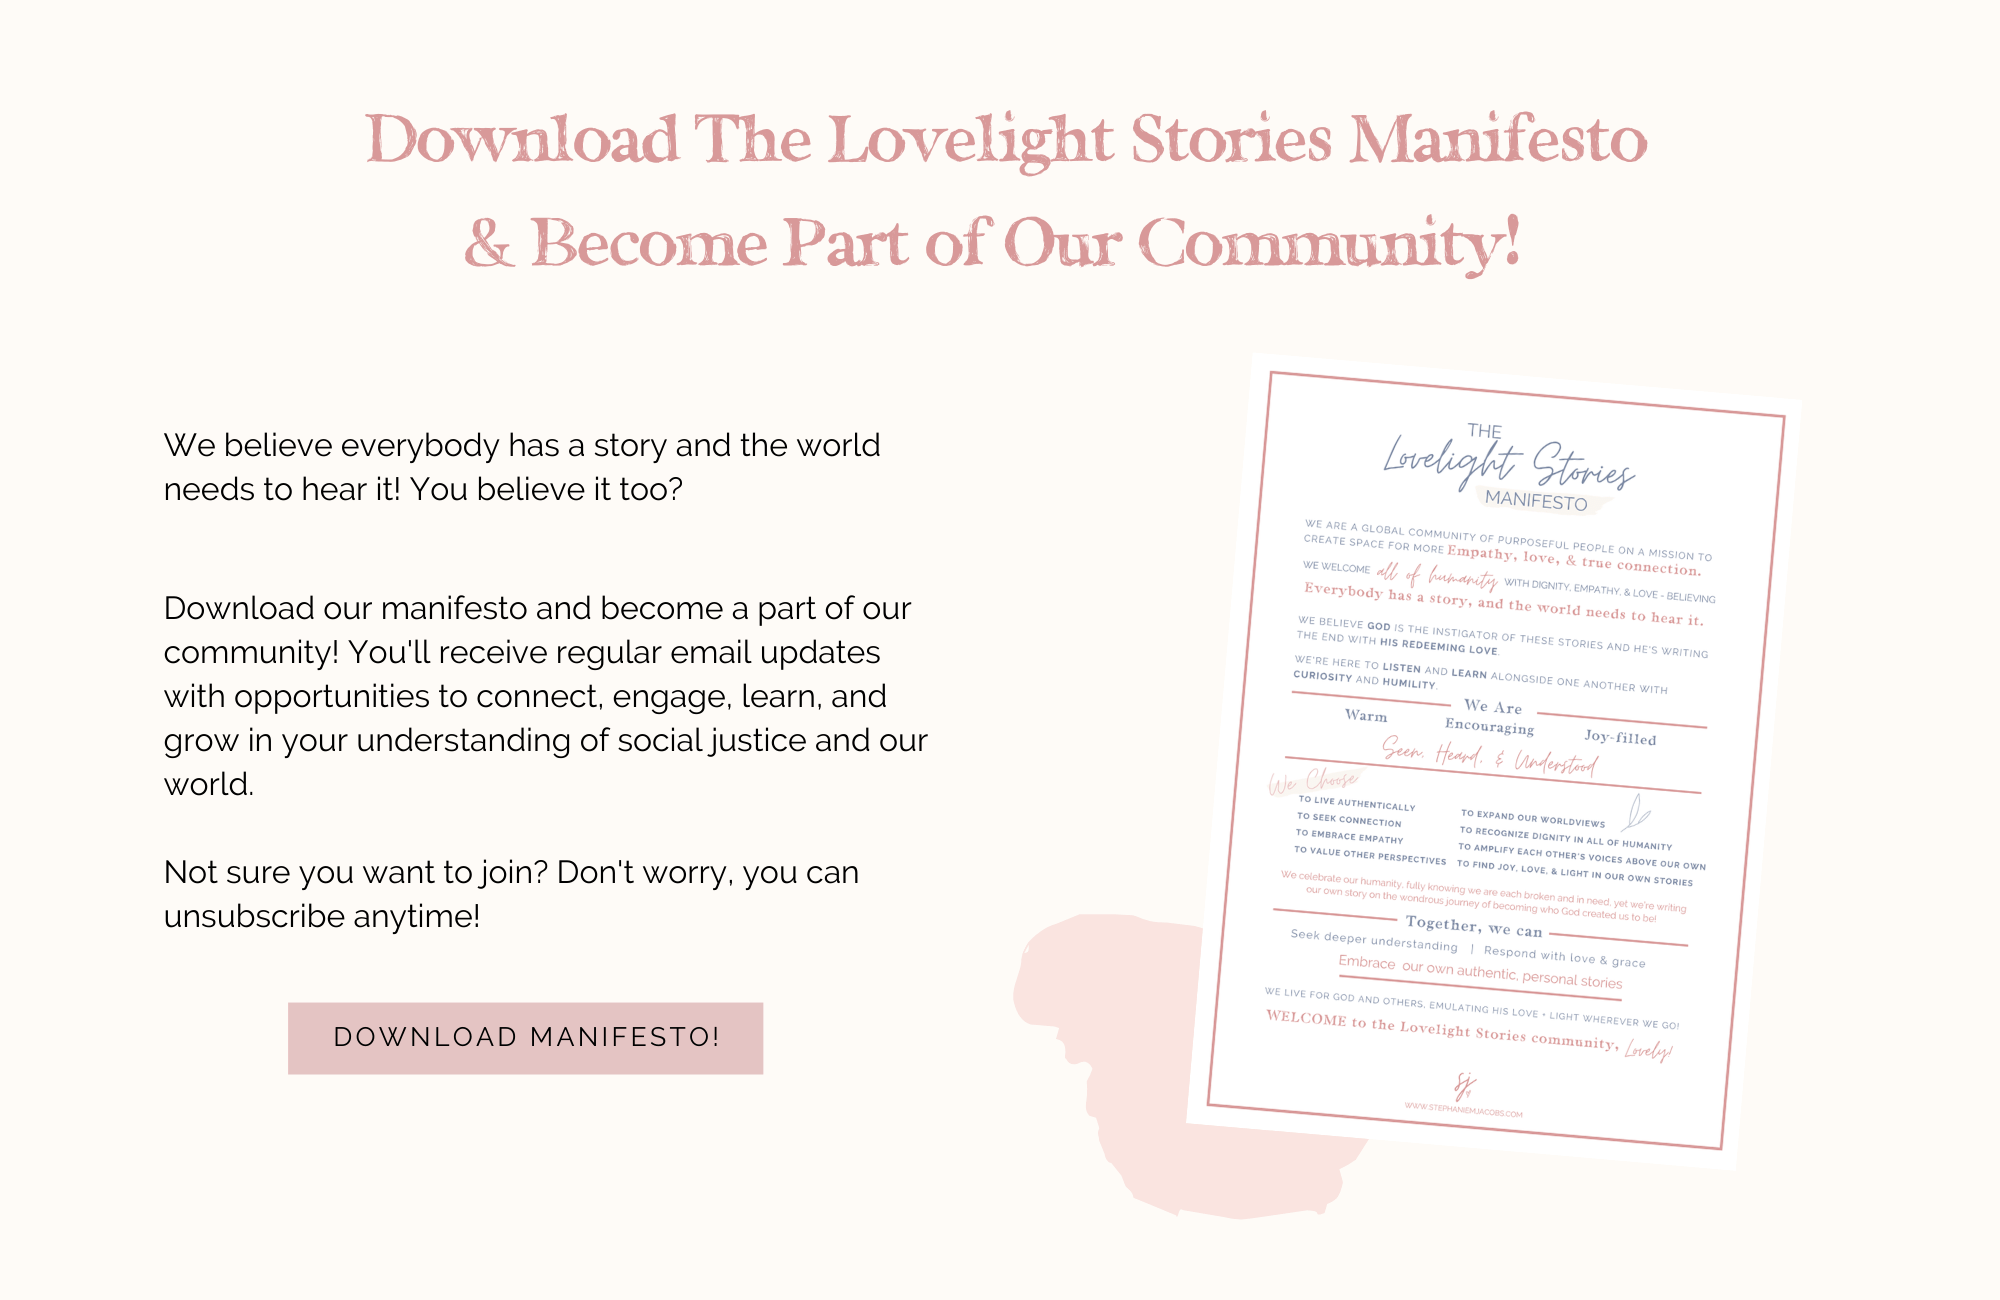 Download The Lovelight Stories Manifesto & Become Part of Our Community!